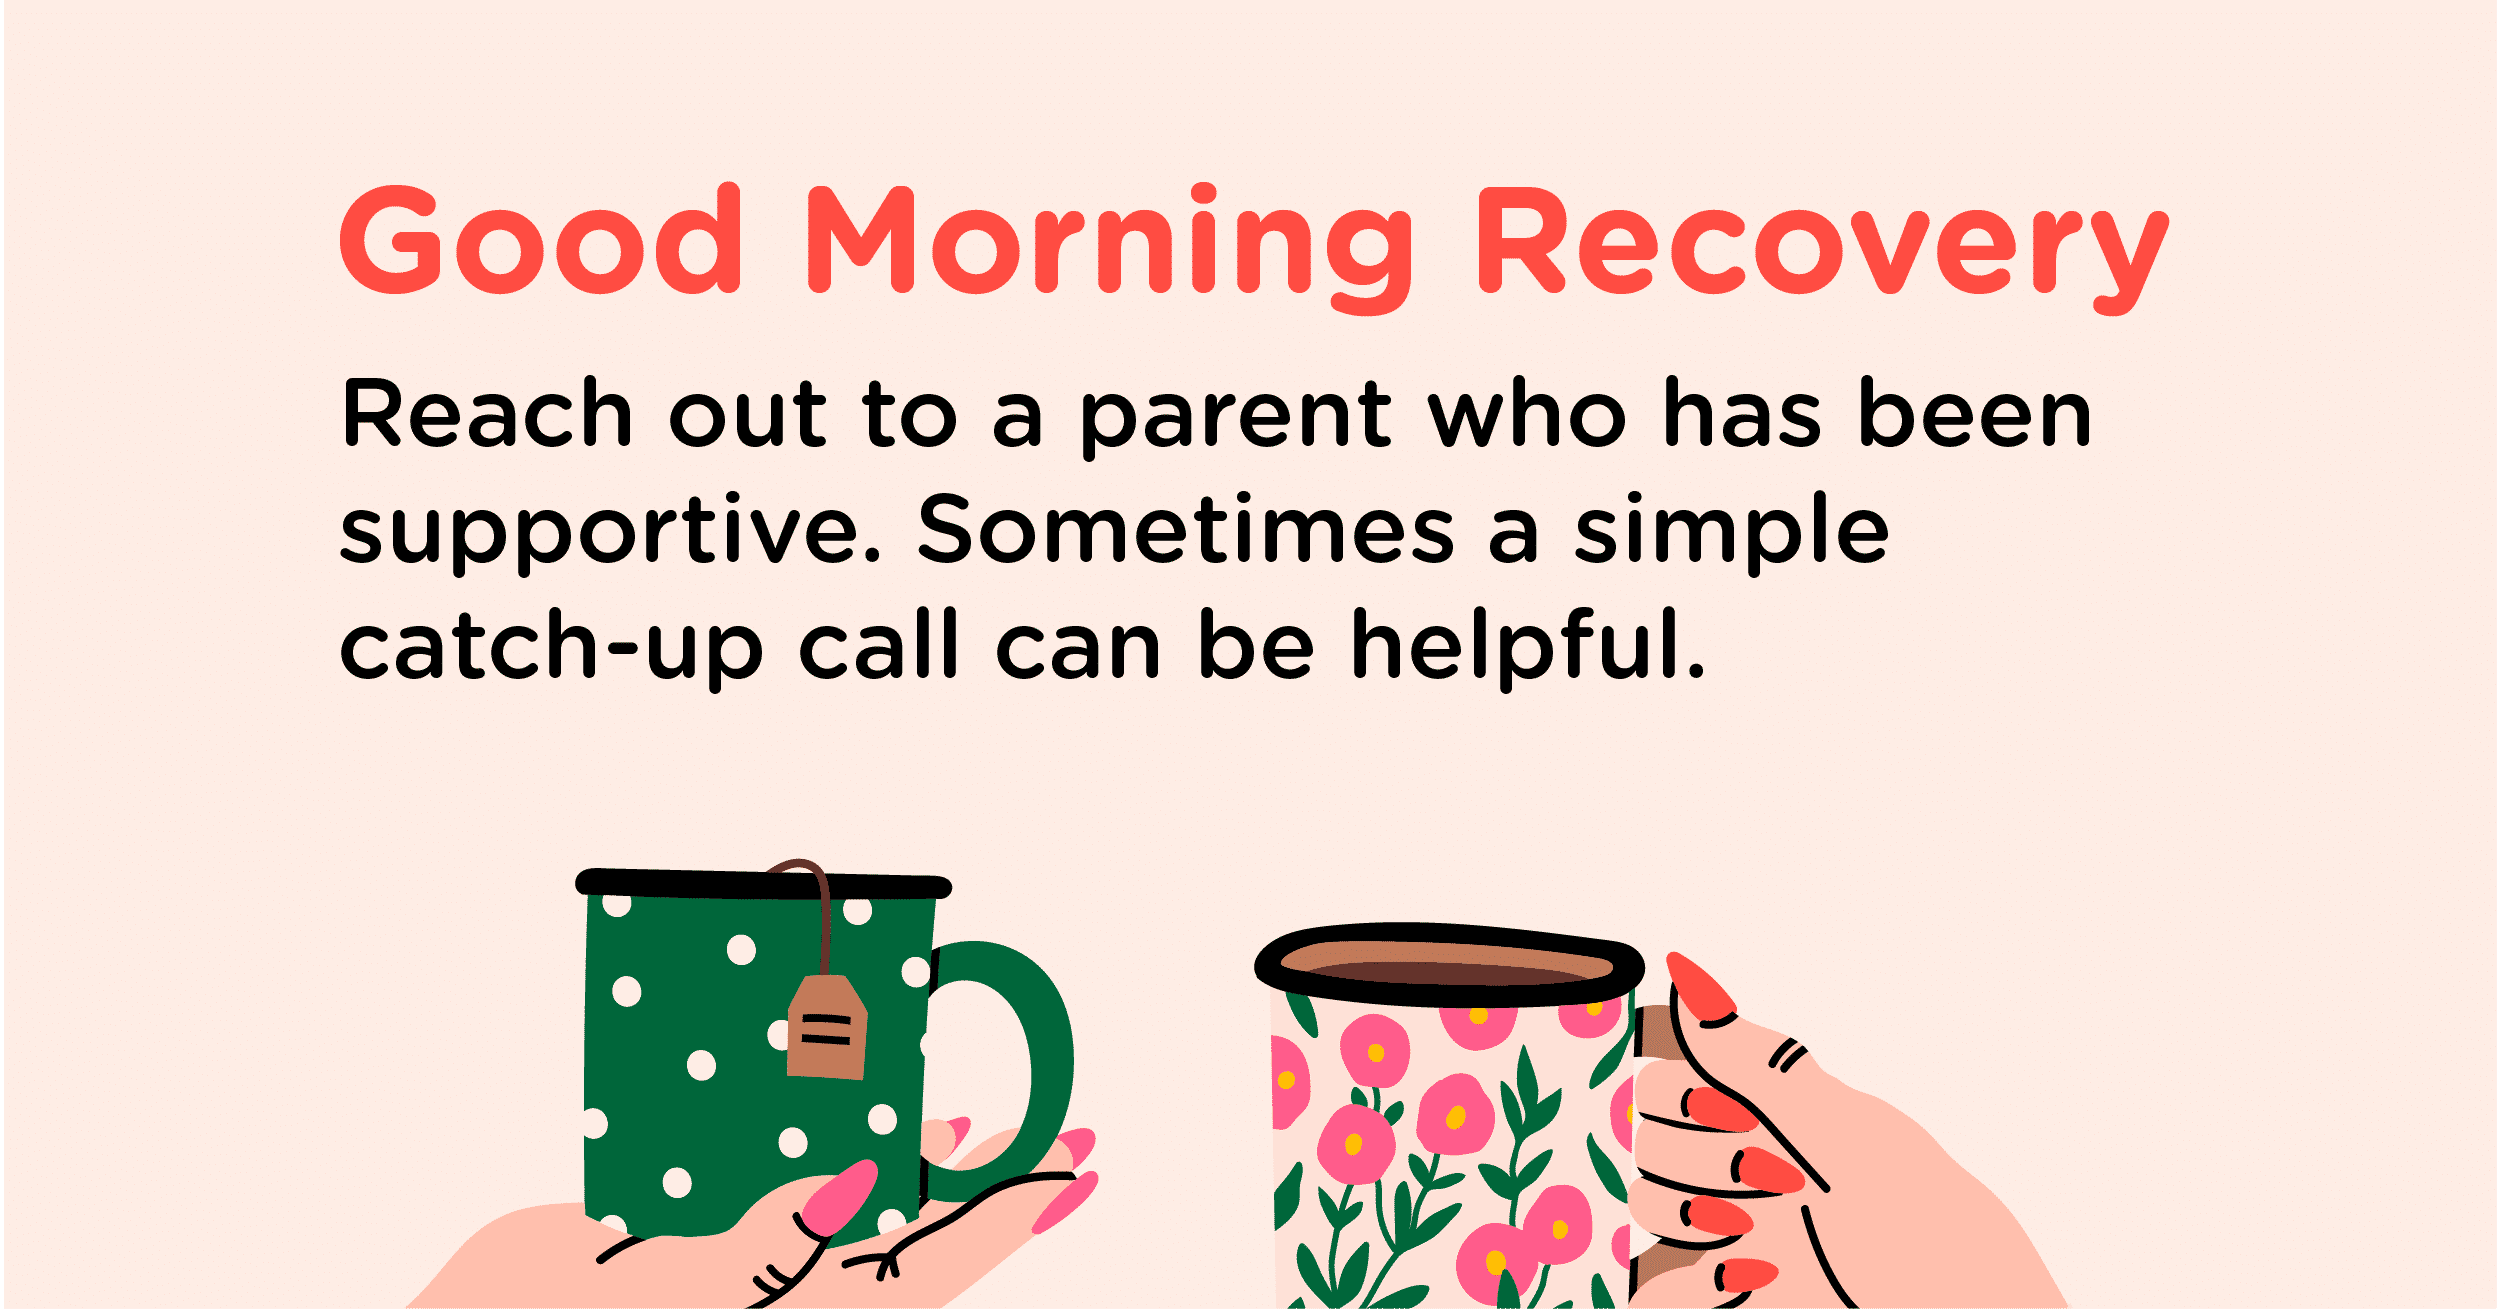 Good Morning Recovery support